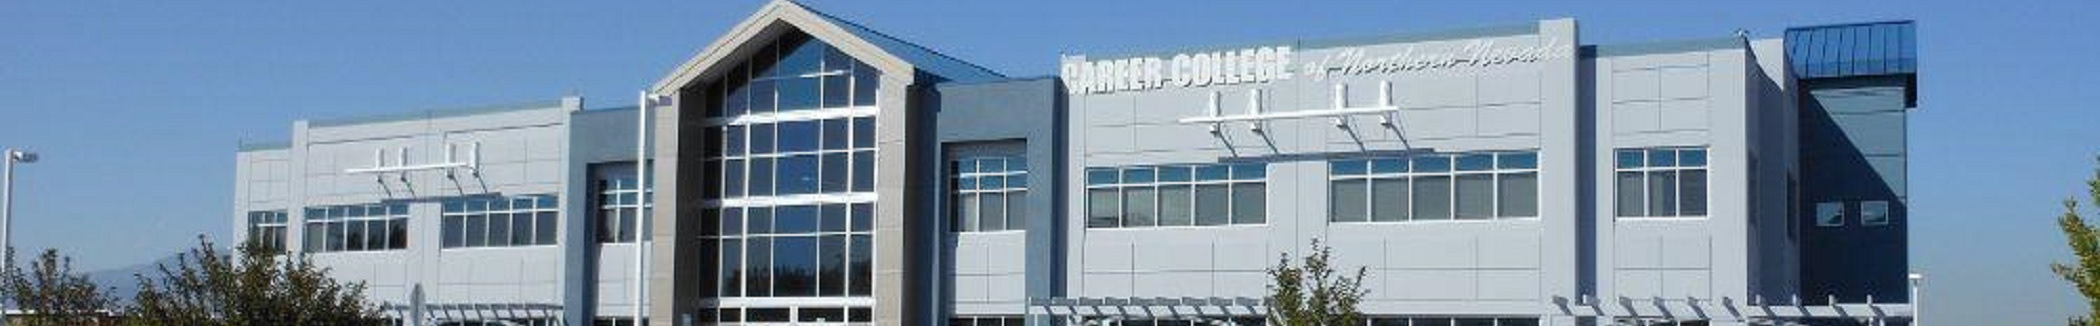 Career College of Northern Nevada's profile banner